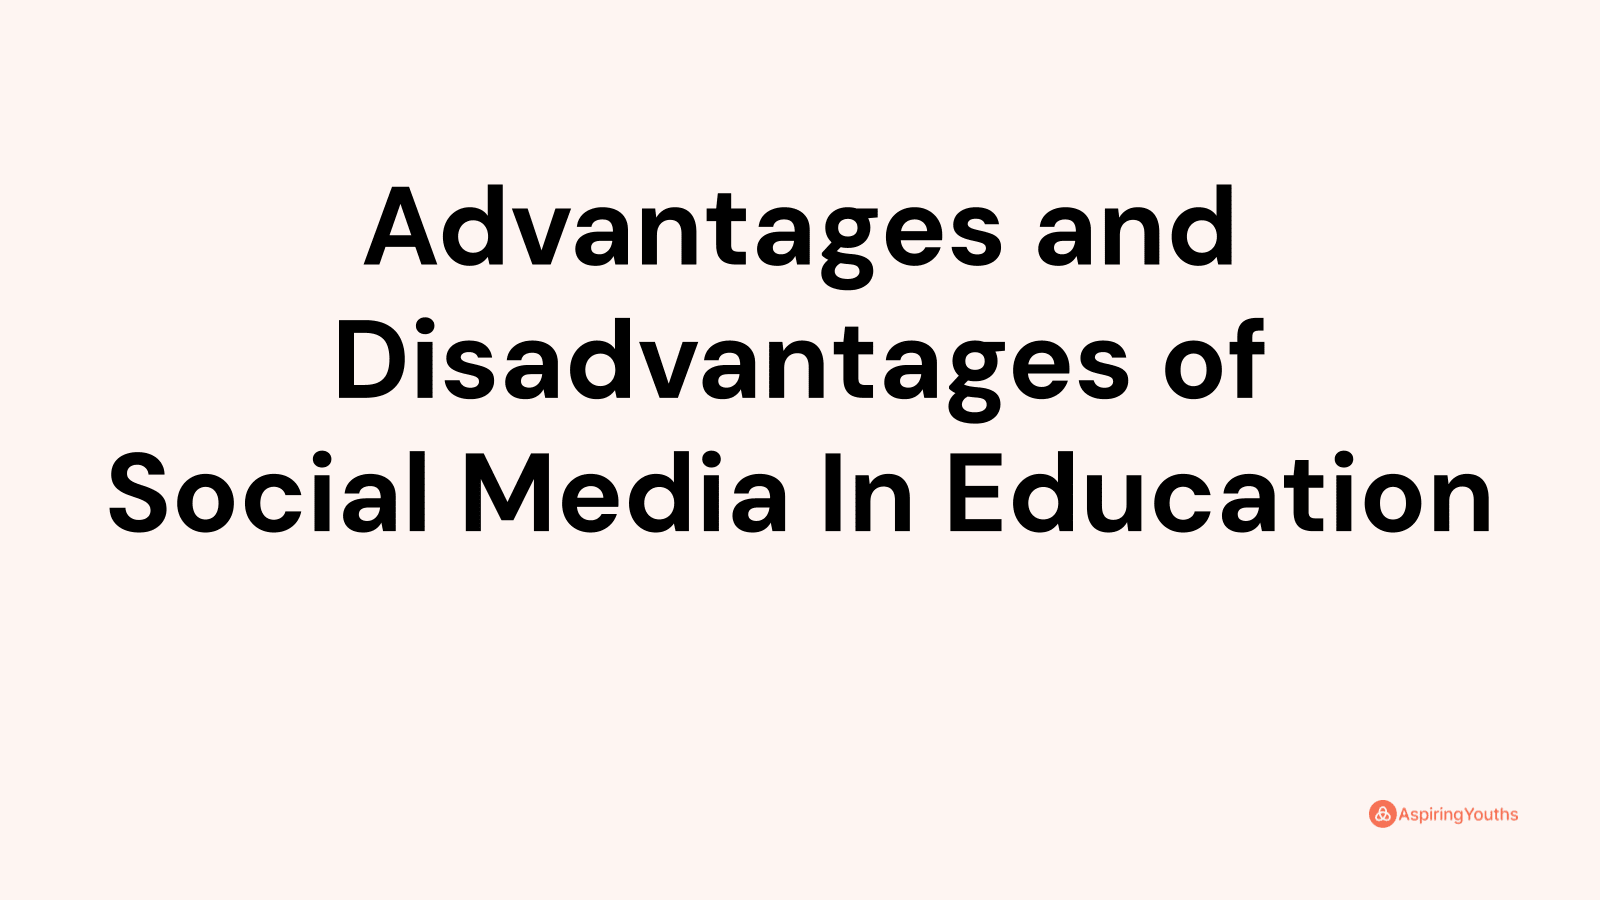 Advantages and disadvantages of Social Media In Education